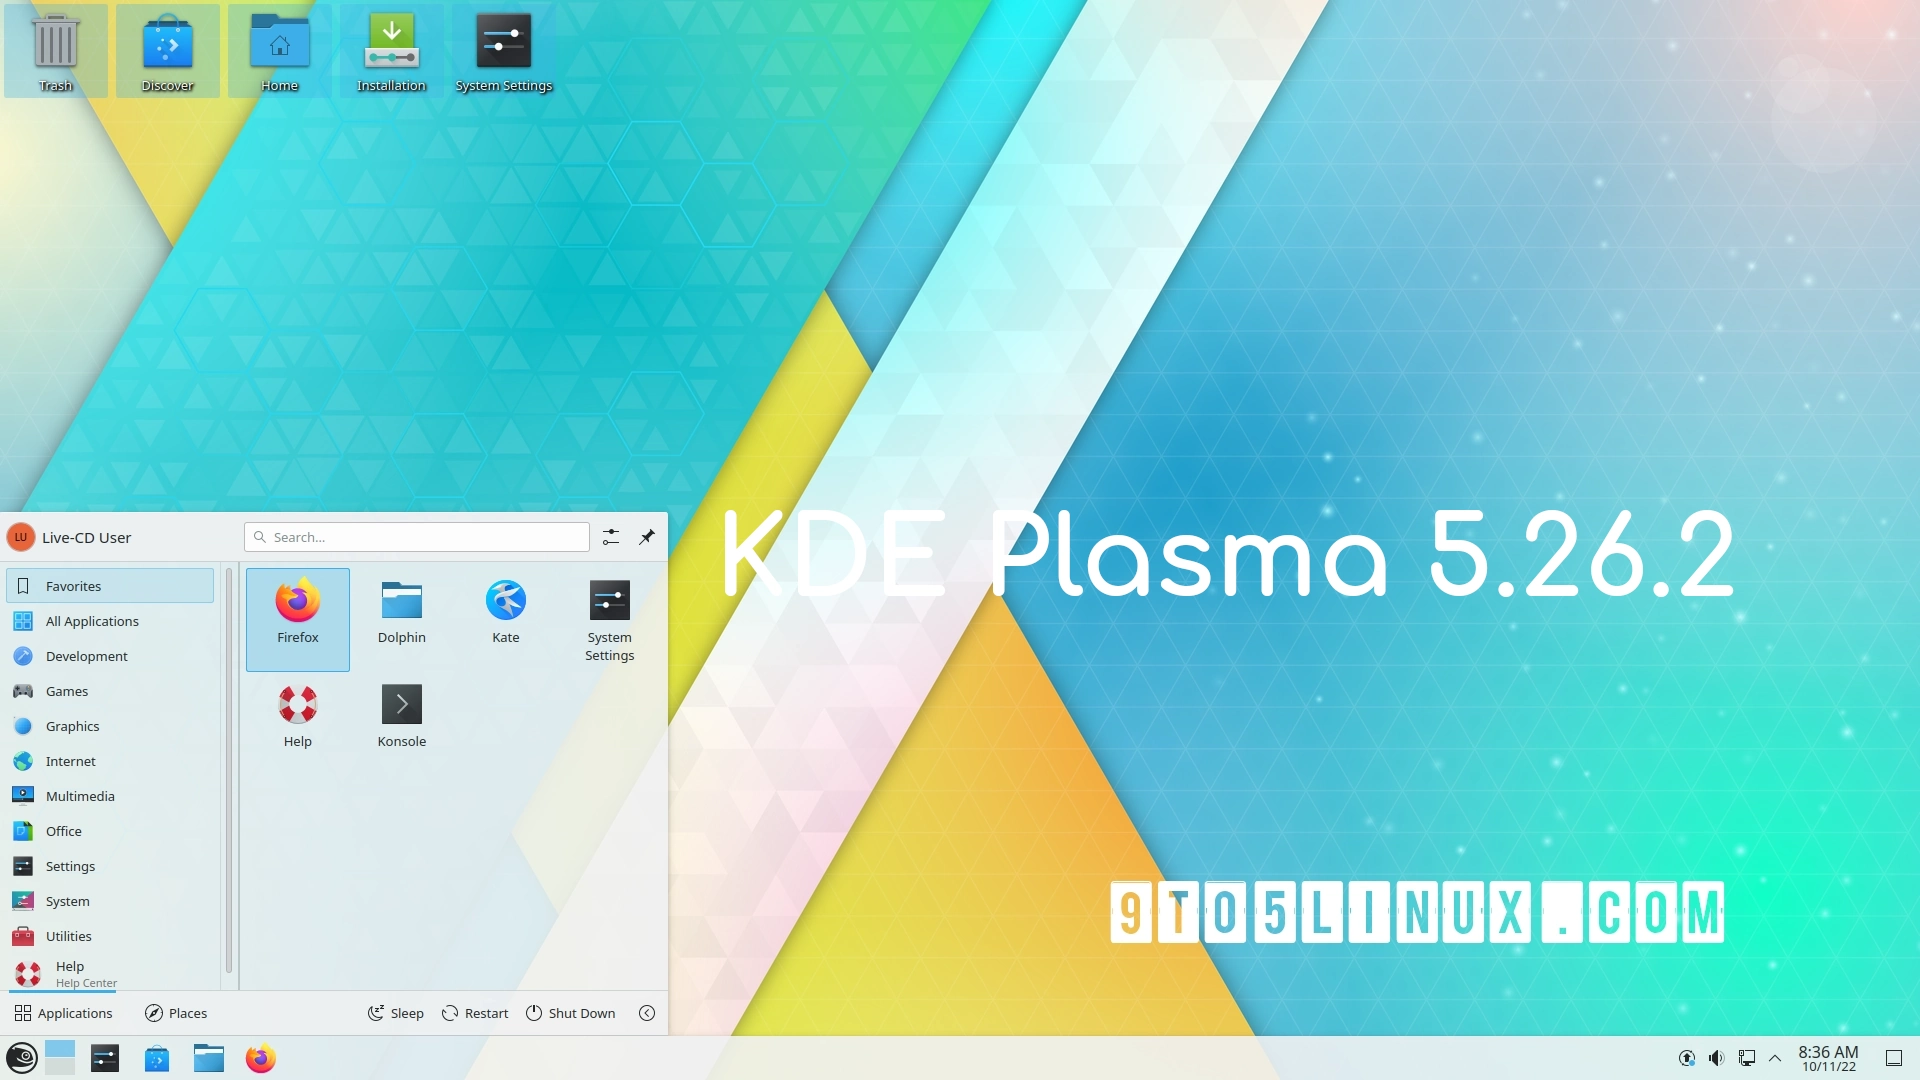 KDE Plasma 5.26.2 Disables Animated Wallpaper Feature on X11 Due to Severe Memory Leak